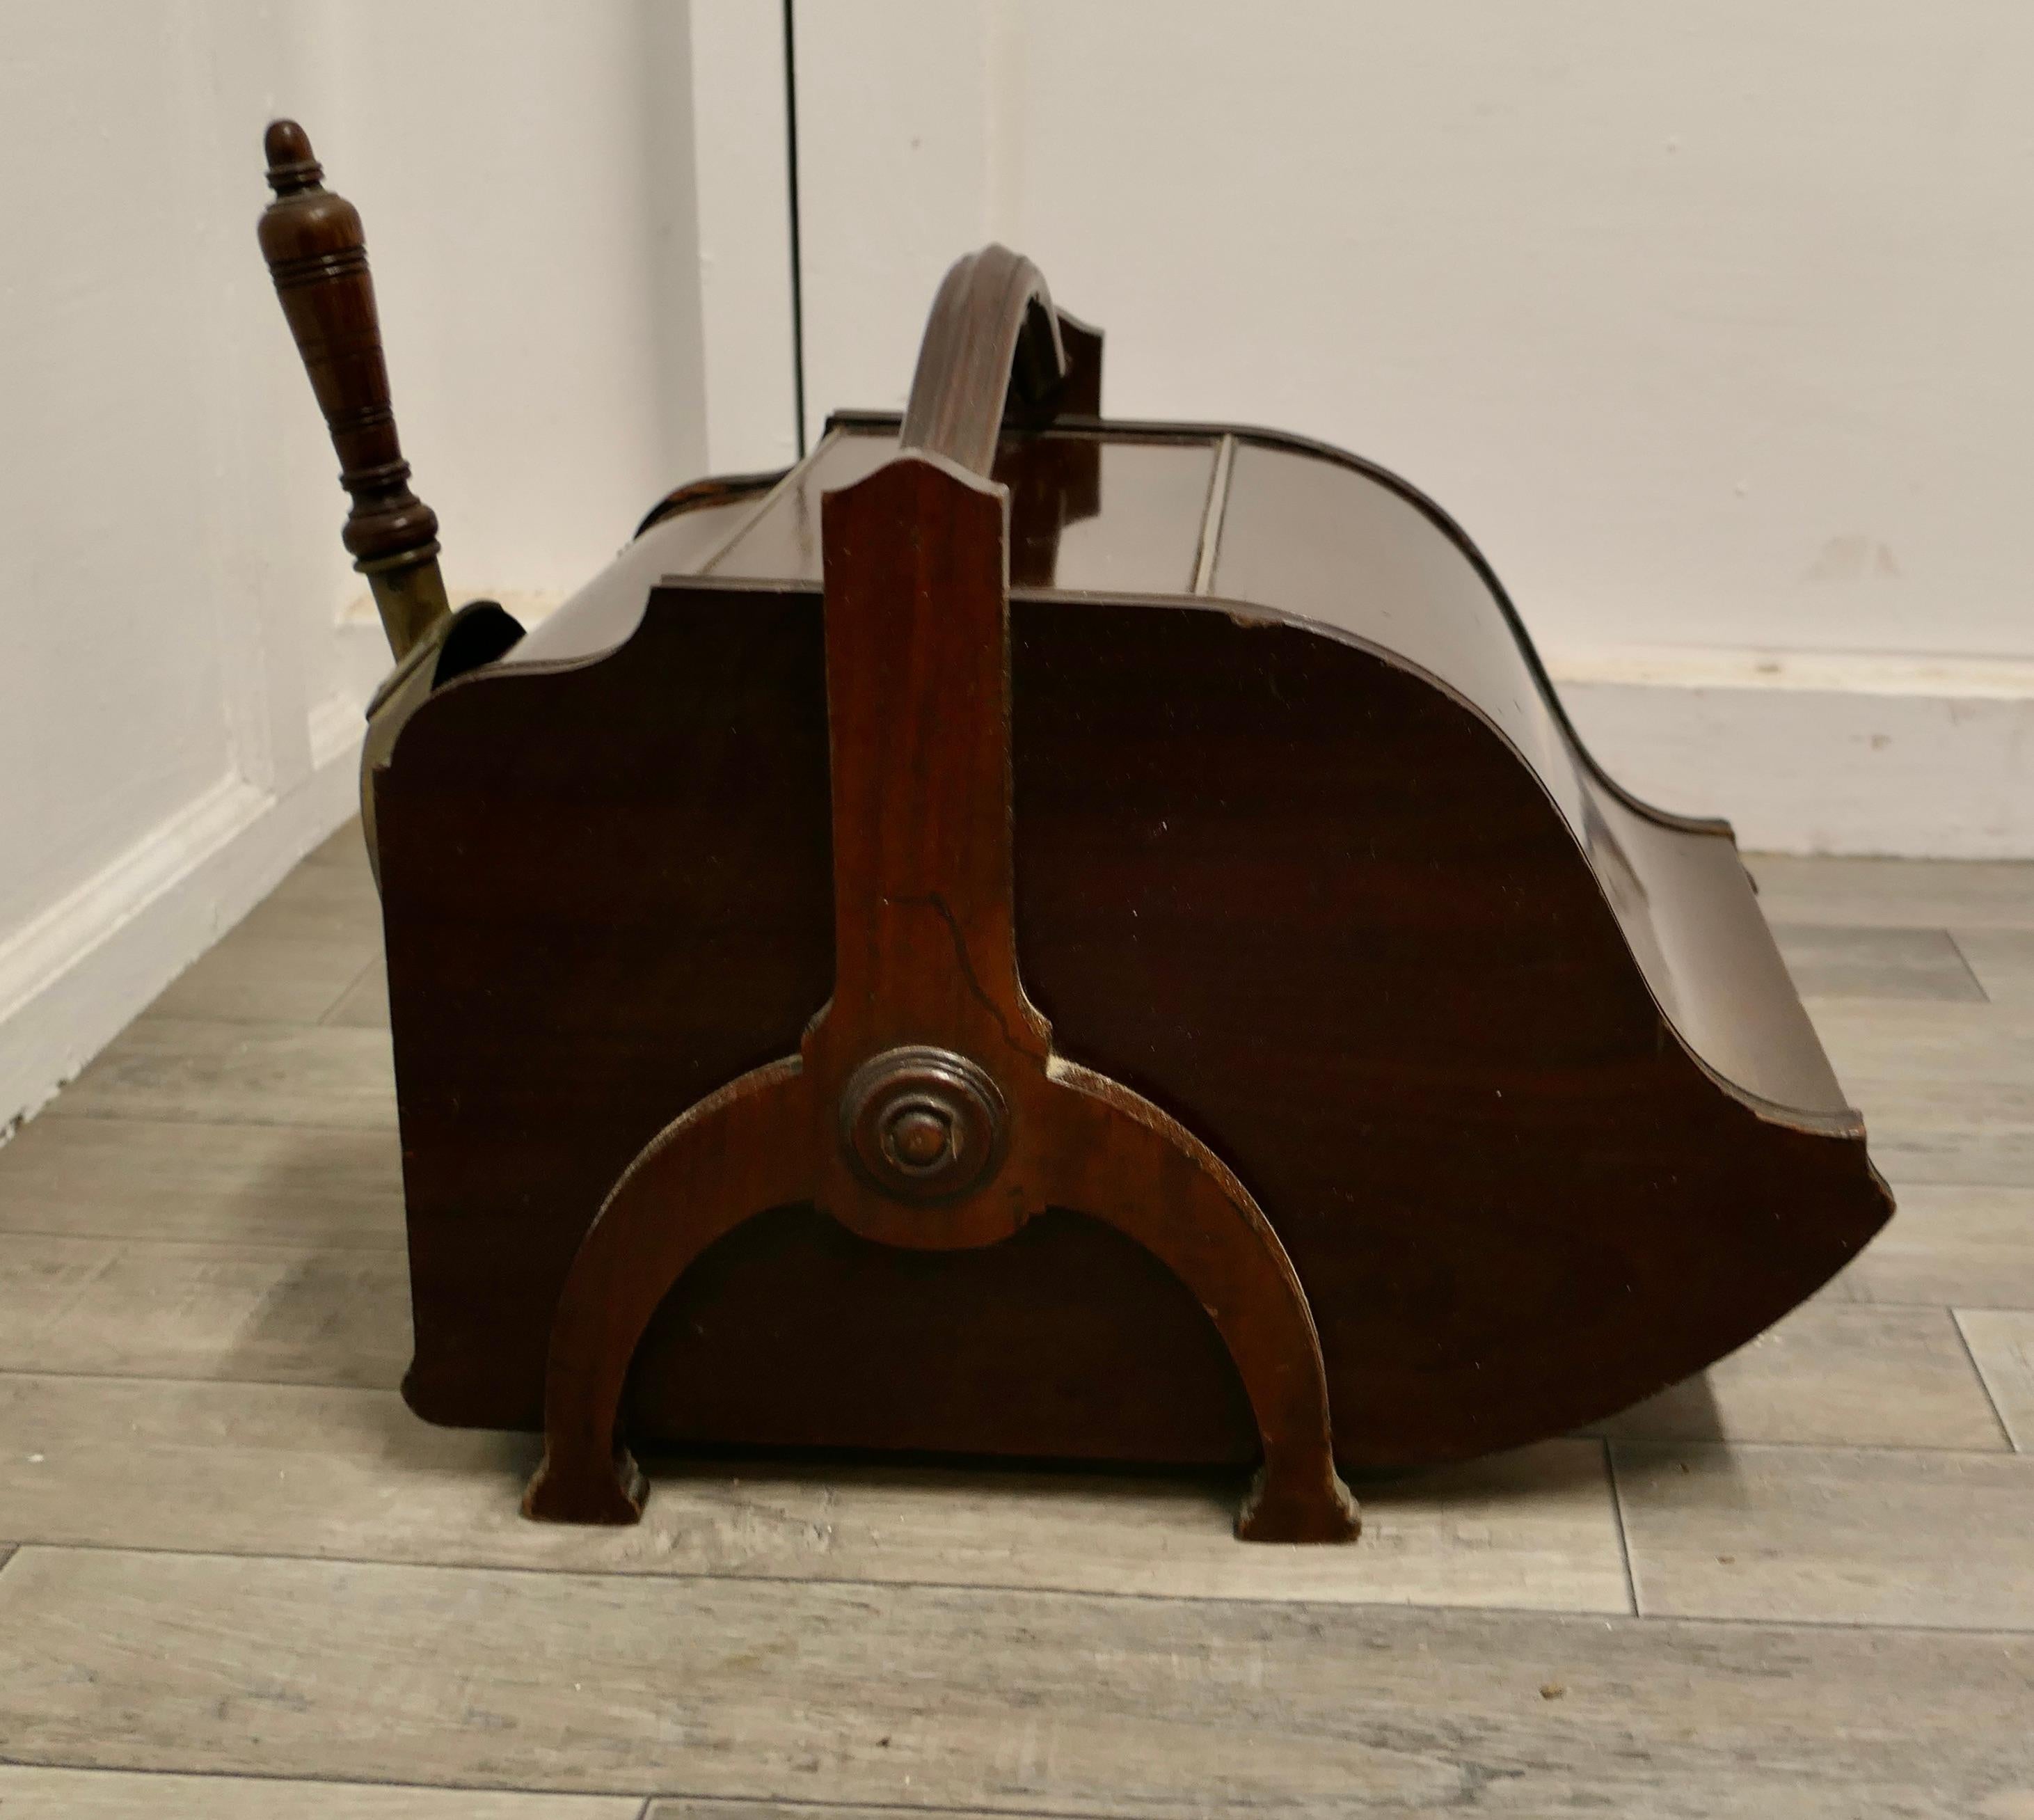 A Victorian Double Ended Coal Box with Liner and Shovel

A charming piece of useful Victorian furniture, the box has a piano shaped opening front it also opens at the back with a shovel and holder and a metal liner which is removable from the back